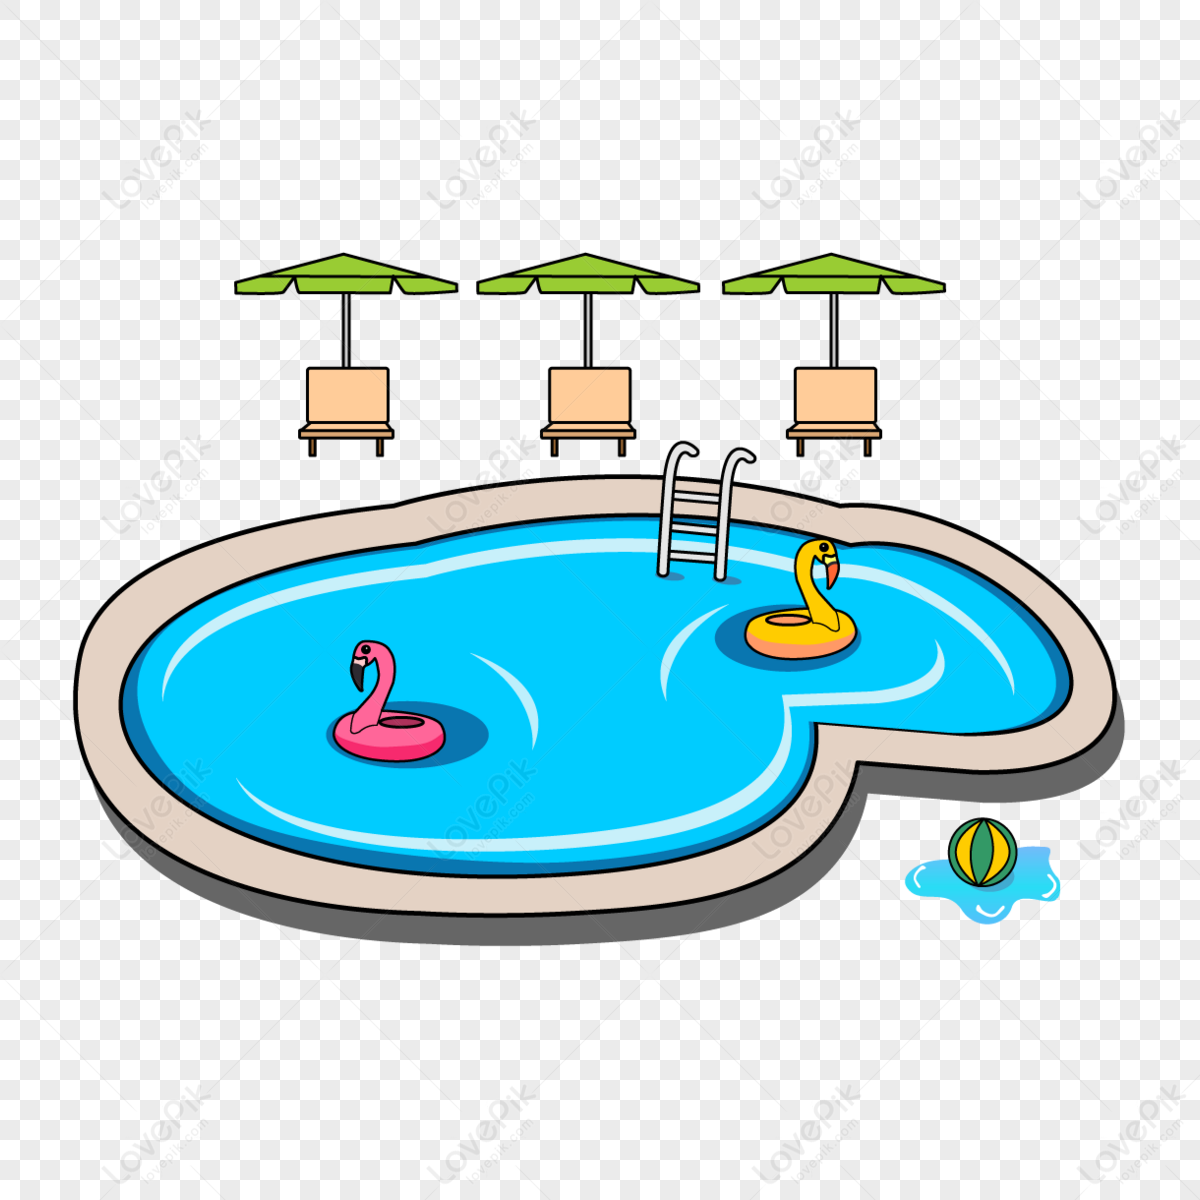 Swimming Pool Clipart,blue Watermark,green Umbrella,pool Party PNG ...